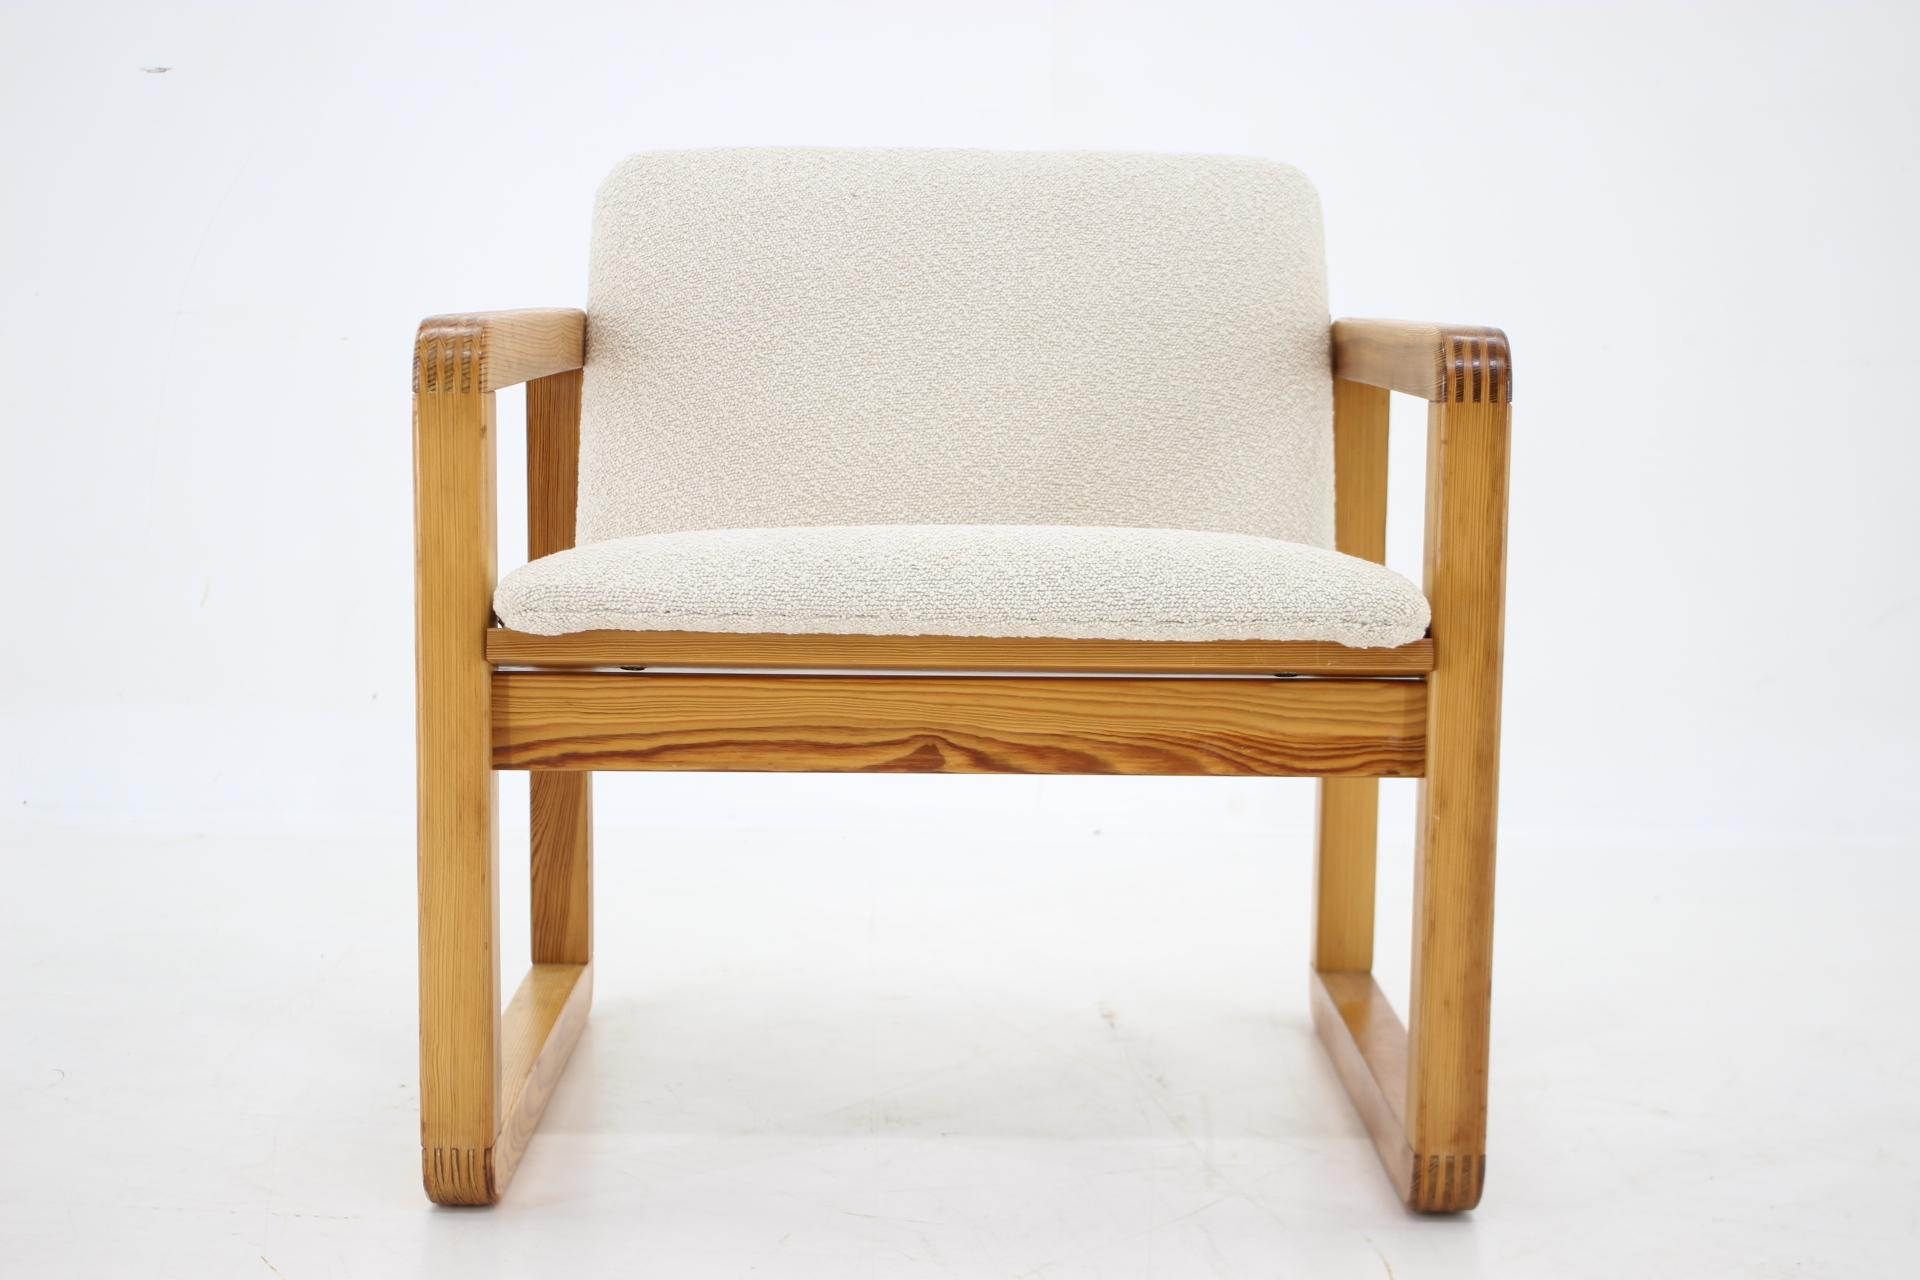 - Newly upholstered in boucle fabric
- carefully refurbished 
- Made of pine wood 
- Made in Czechoslovakia.